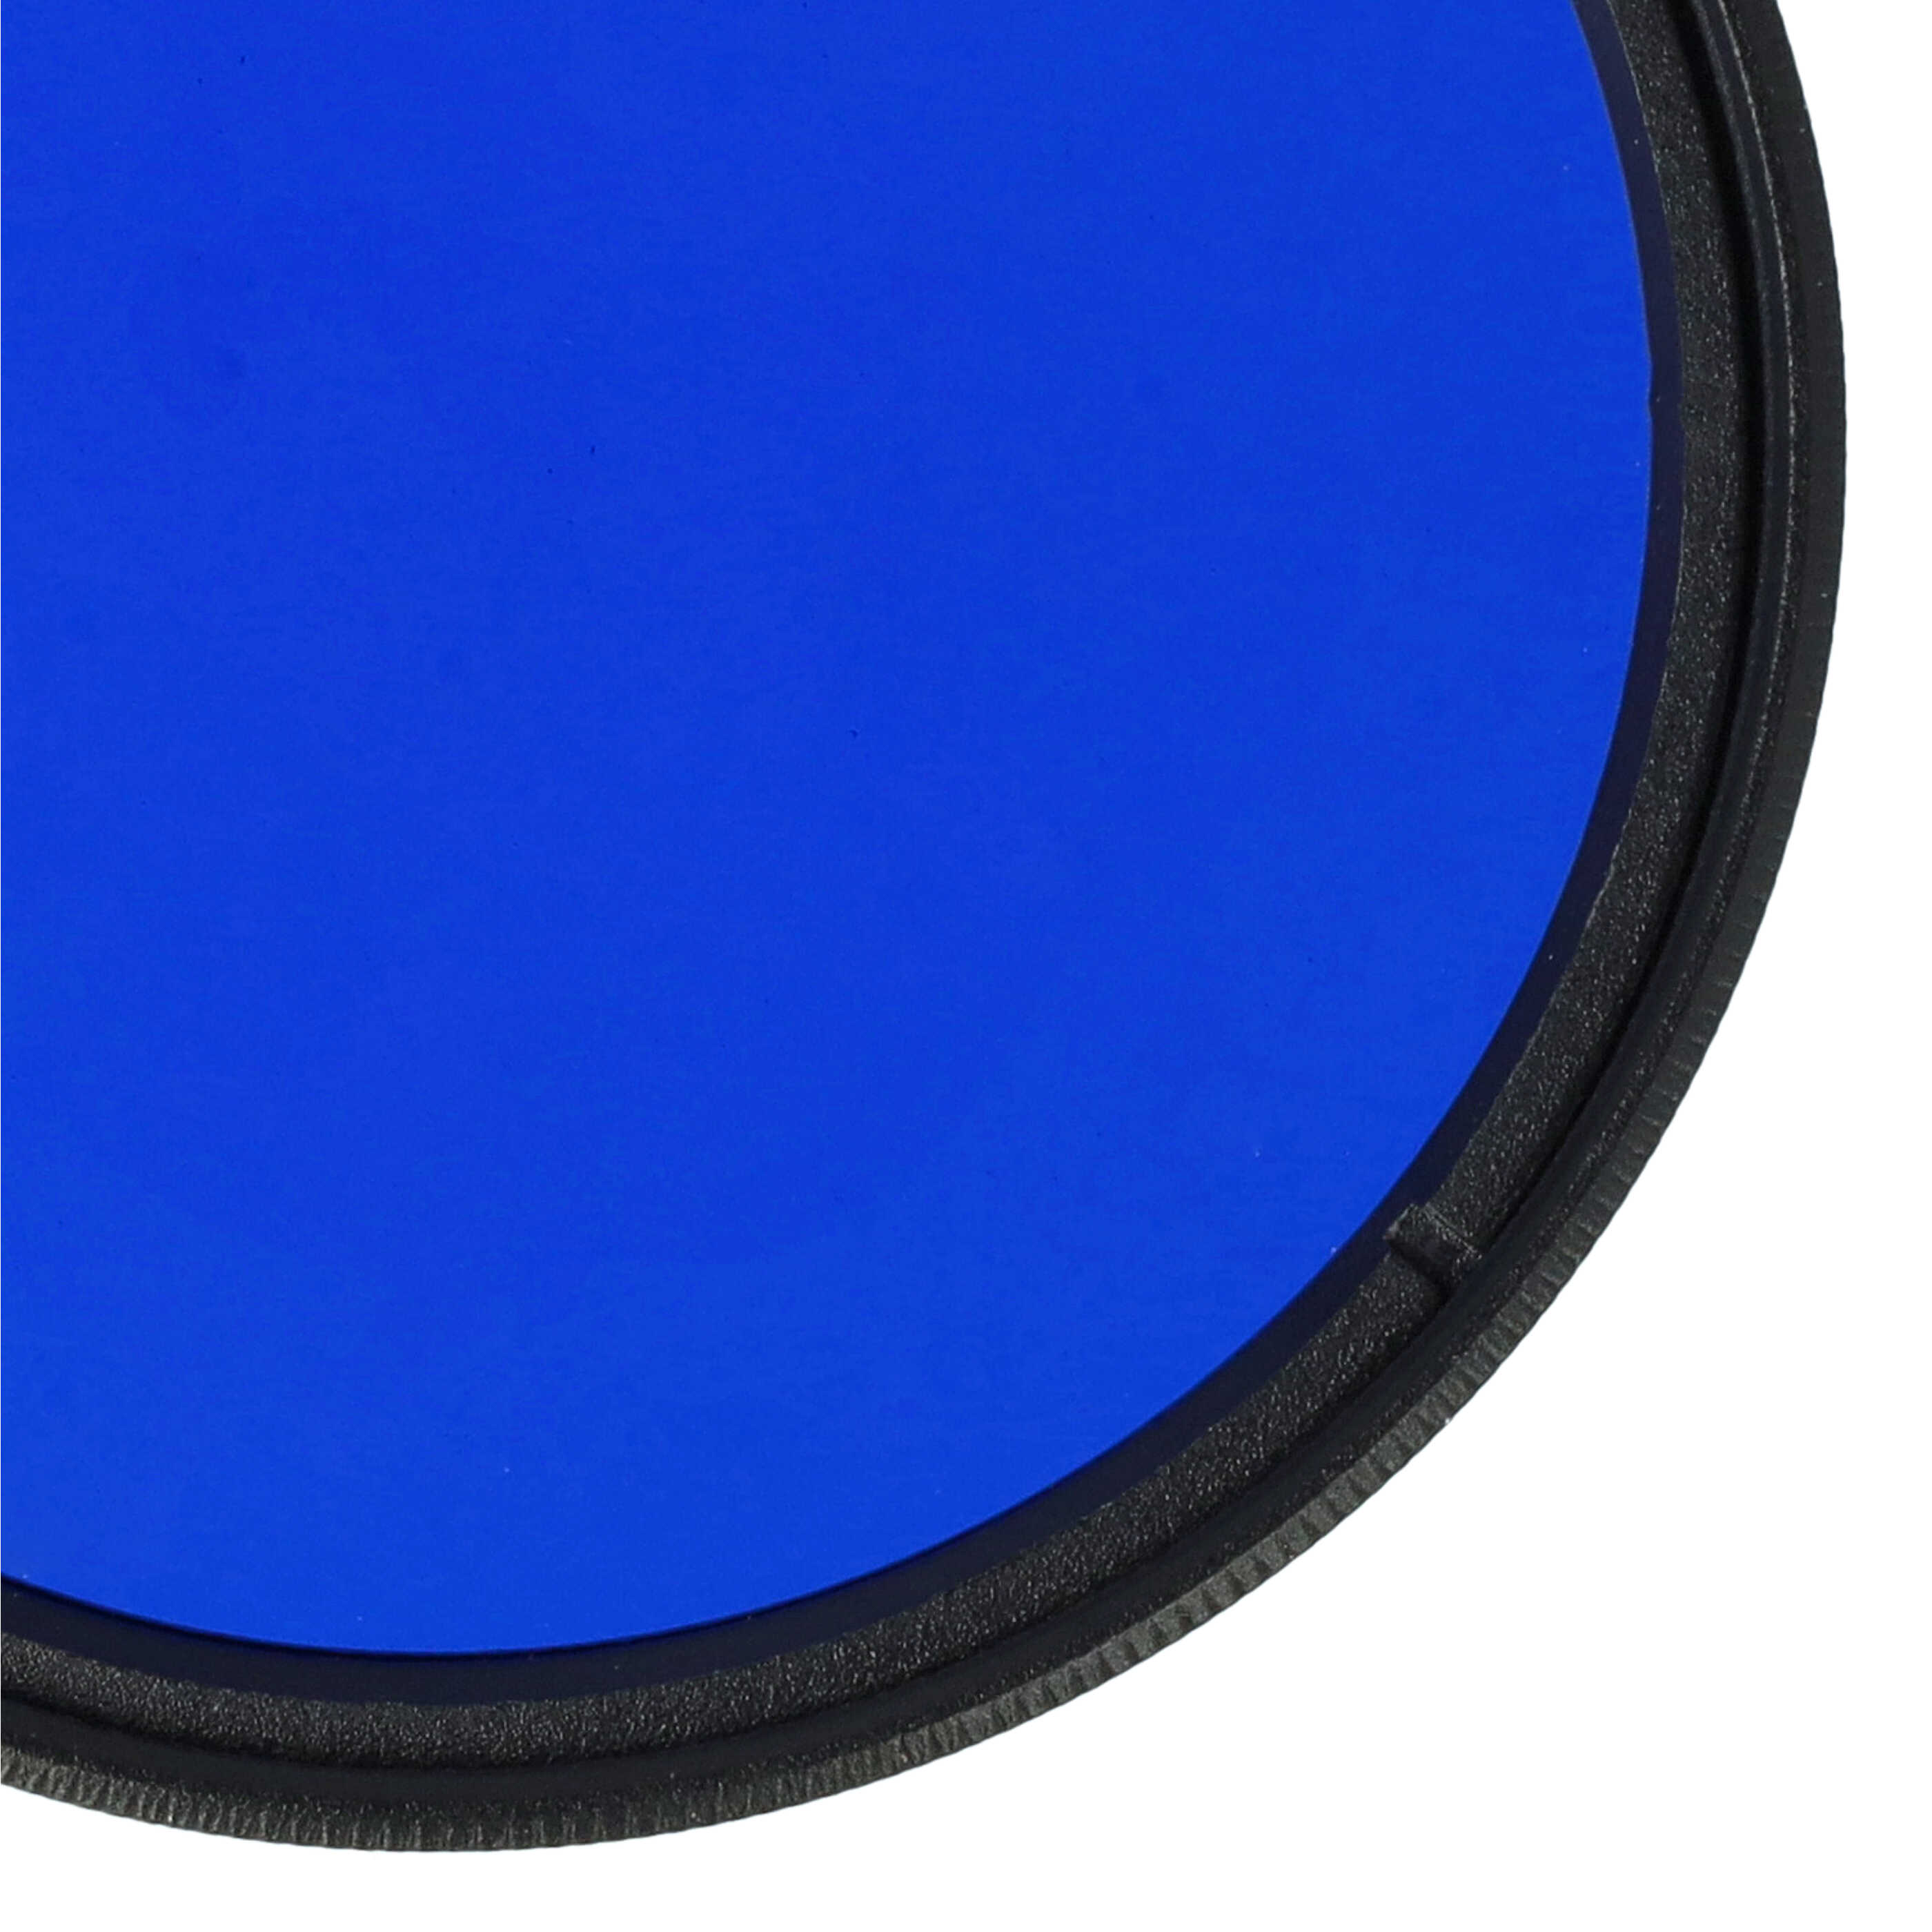 Coloured Filter, Blue suitable for Camera Lenses with 52 mm Filter Thread - Blue Filter